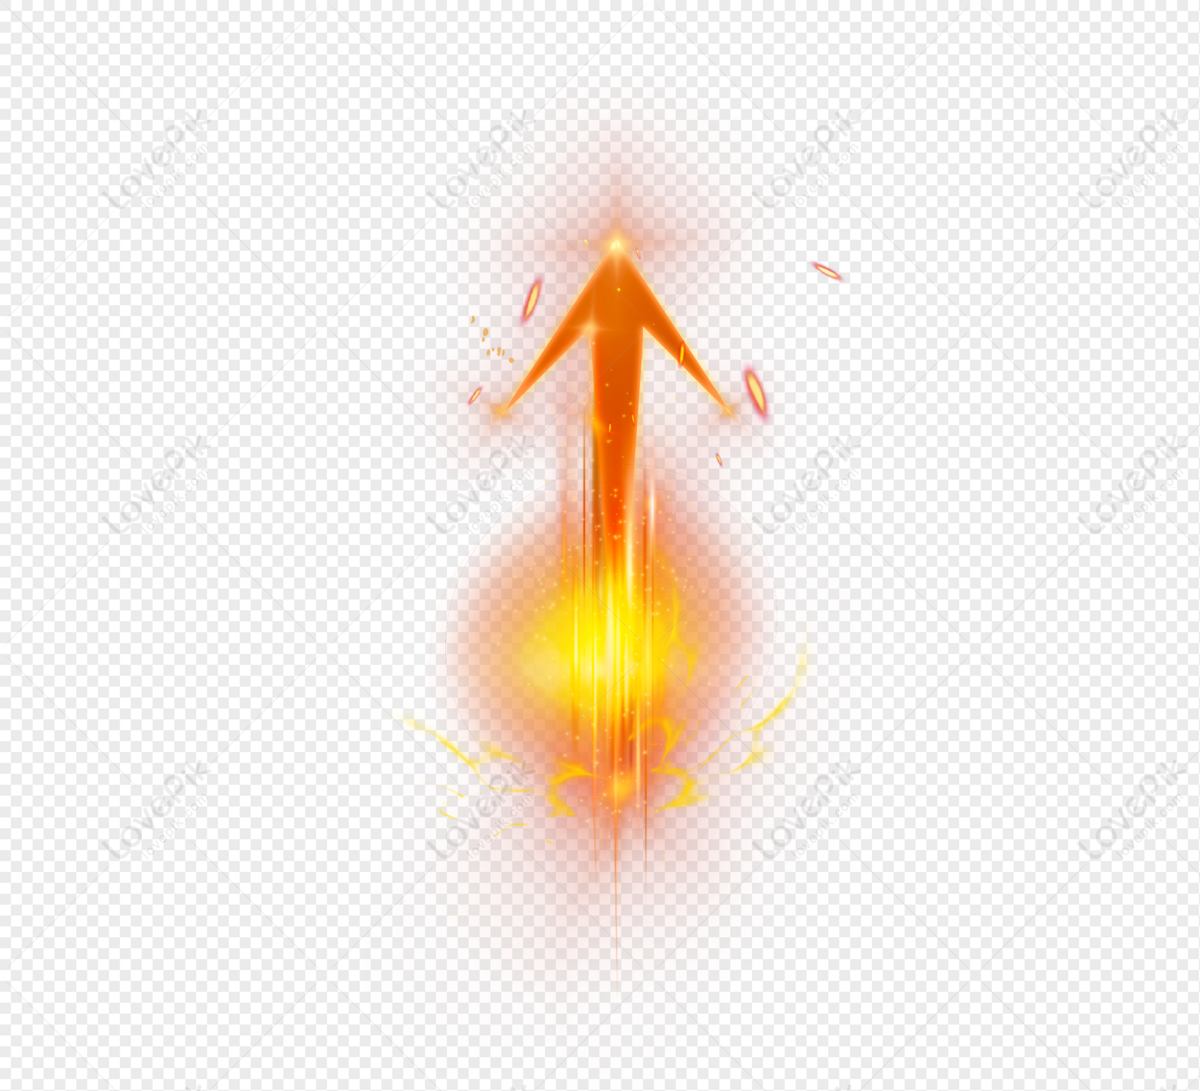 arrow of light graphic clipart